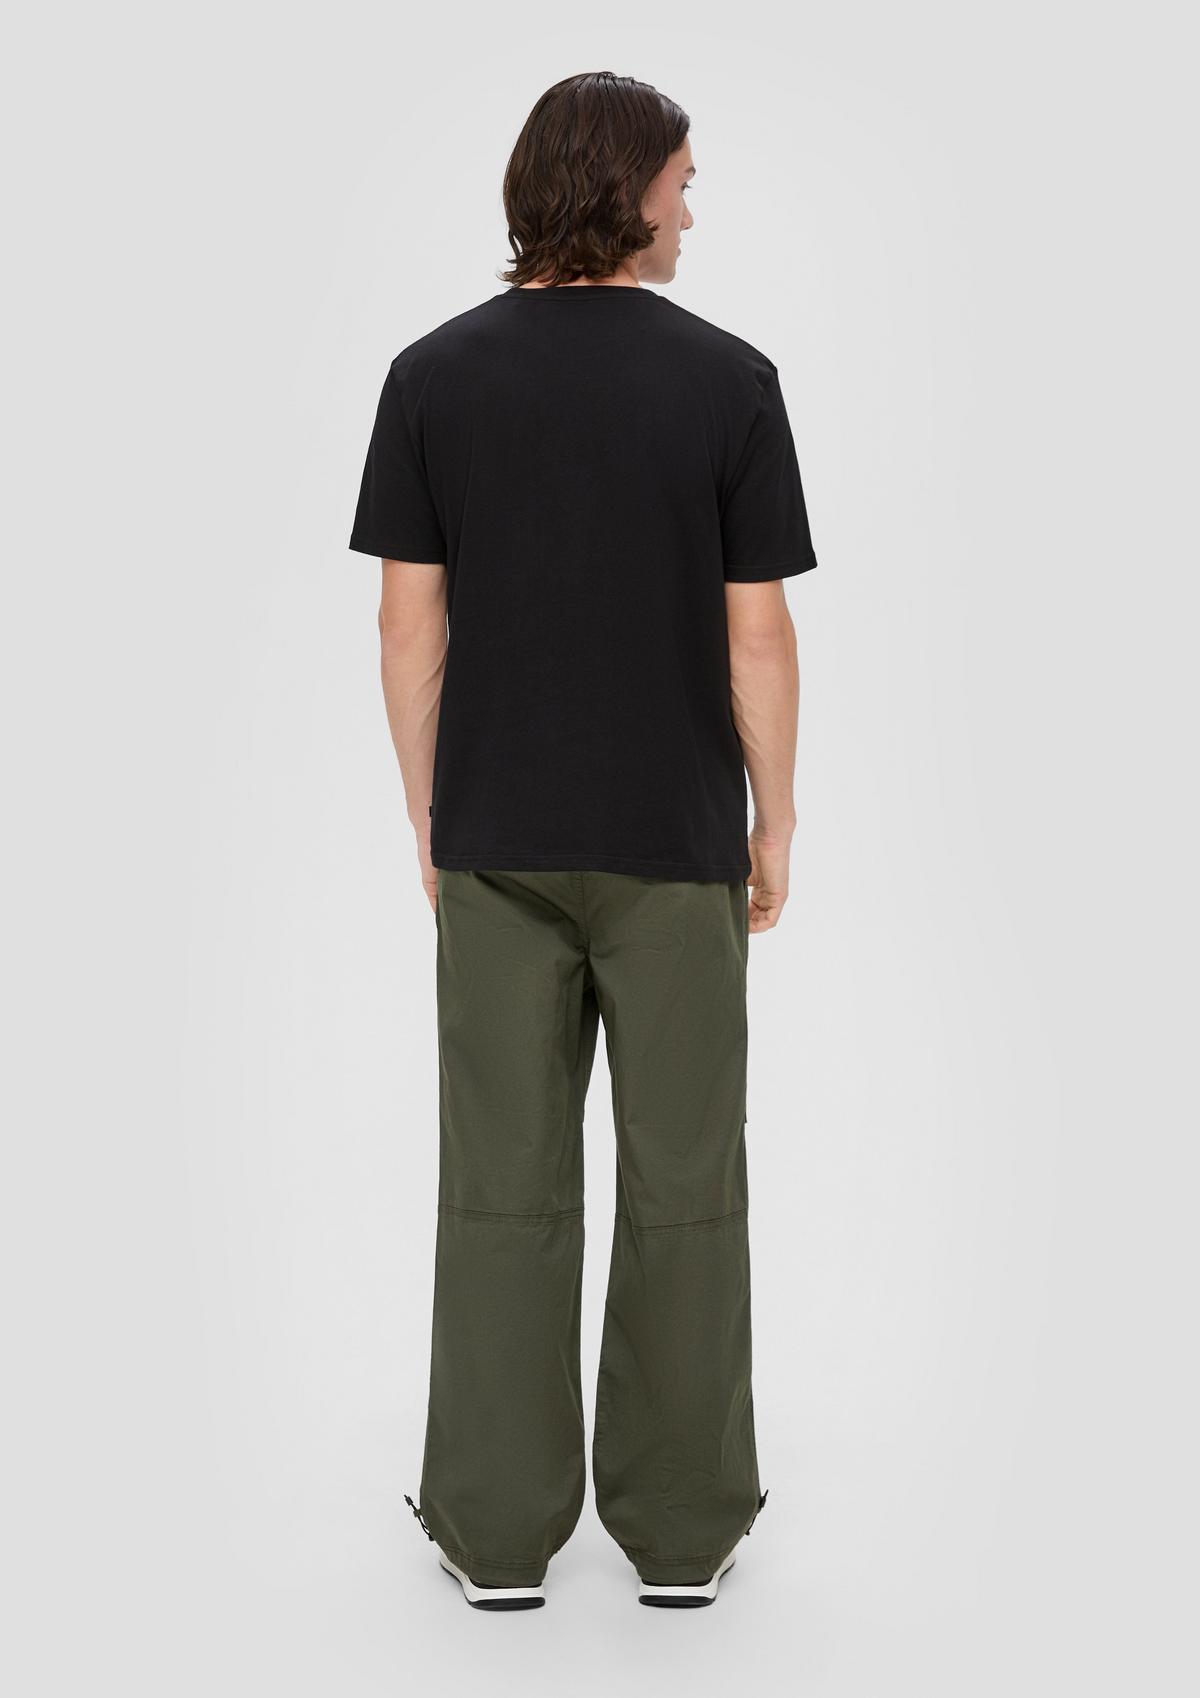 s.Oliver Parachute trousers made of stretch cotton